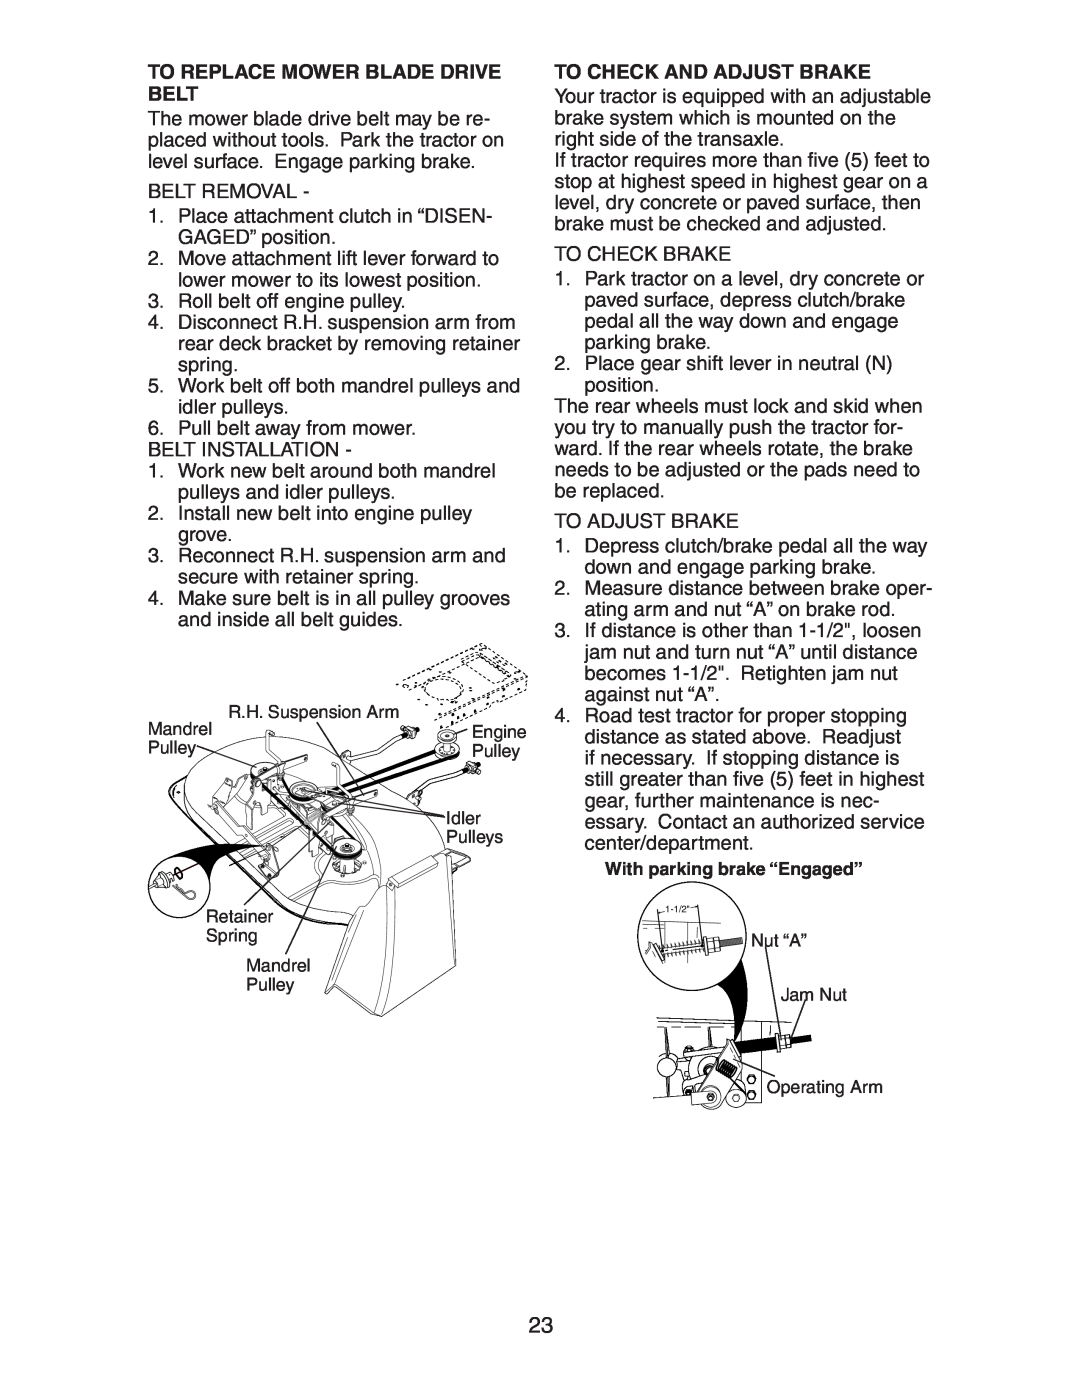 Electrolux AG15538B manual To Replace Mower Blade Drive Belt, To Check And Adjust Brake, With parking brake “Engaged” 